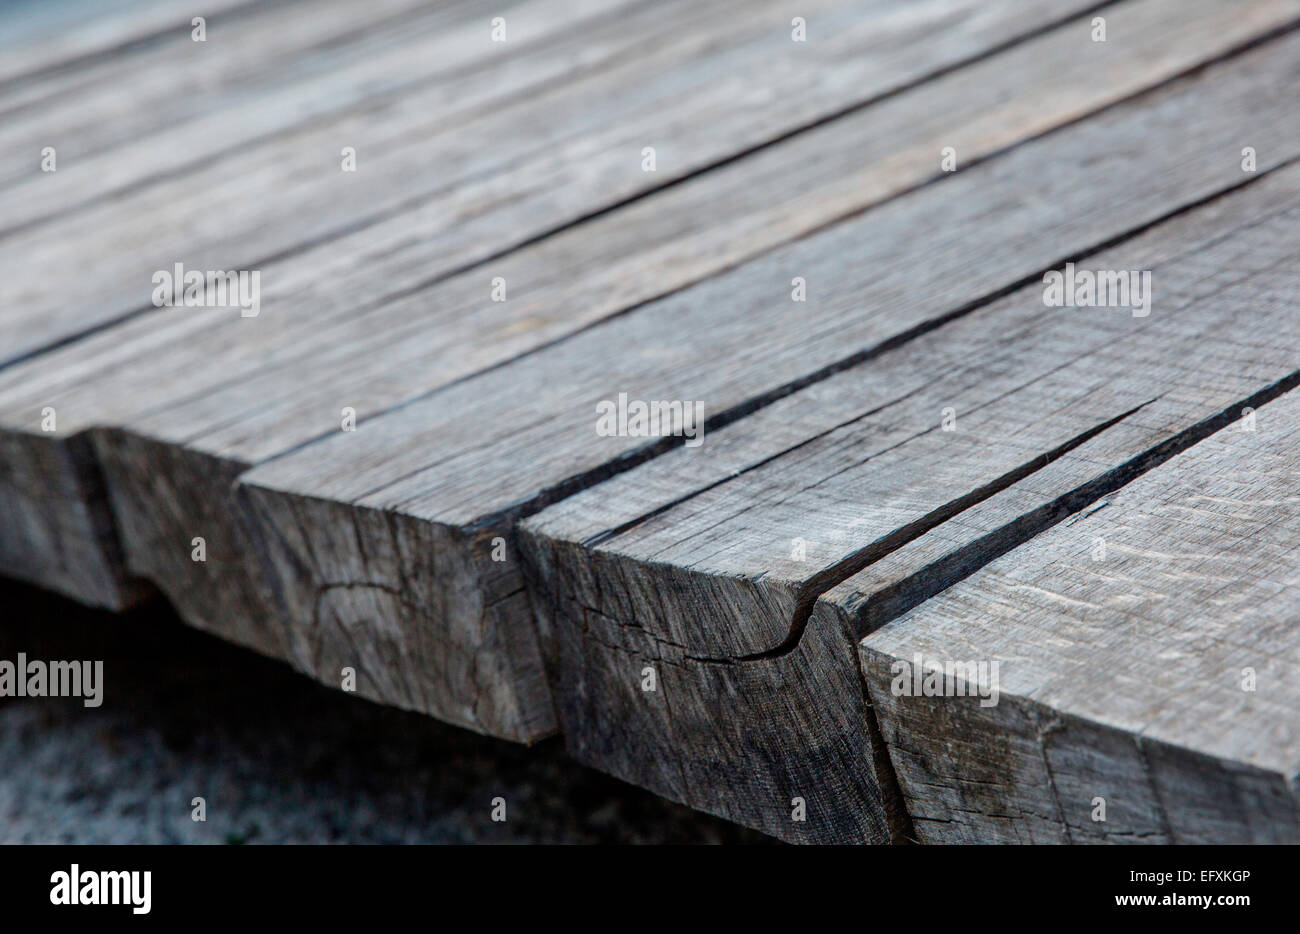 Close up of wooden planks on elevated walkway Stock Photo